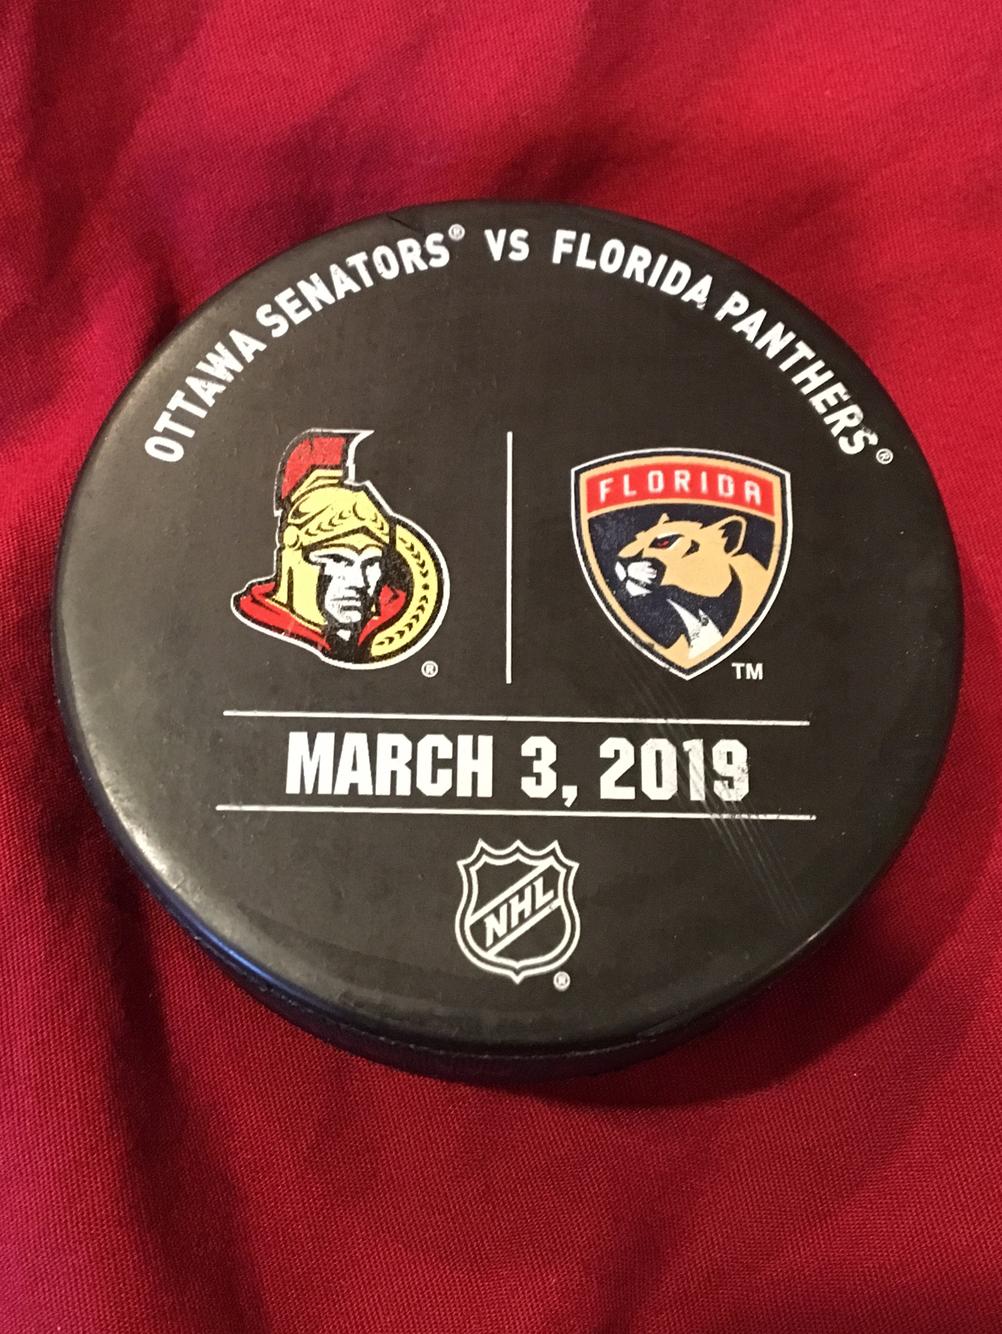 Used During Pre-Game Warm-Ups 2019 Fanatics Authentic Certified Ottawa Senators on March 3 Florida Panthers Practice-Used Puck vs 